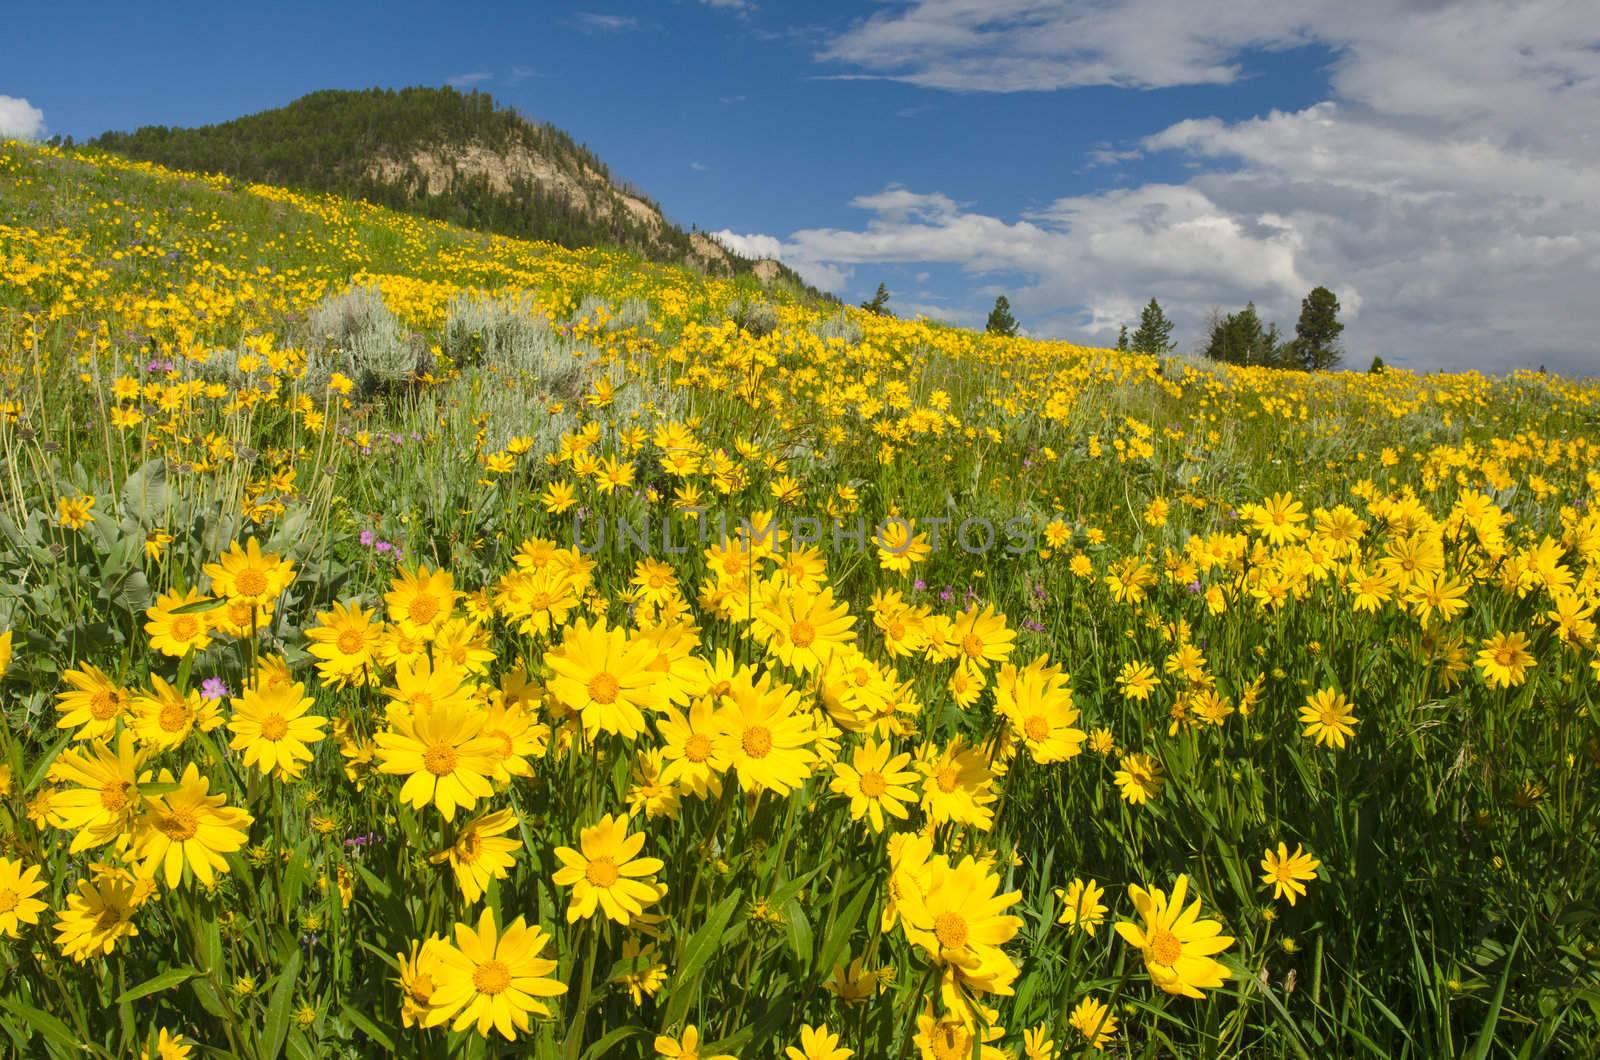 A meadow full of blooming Arnica flowers, Yellowstone National Park, Park County, Wyoming, USA by CharlesBolin